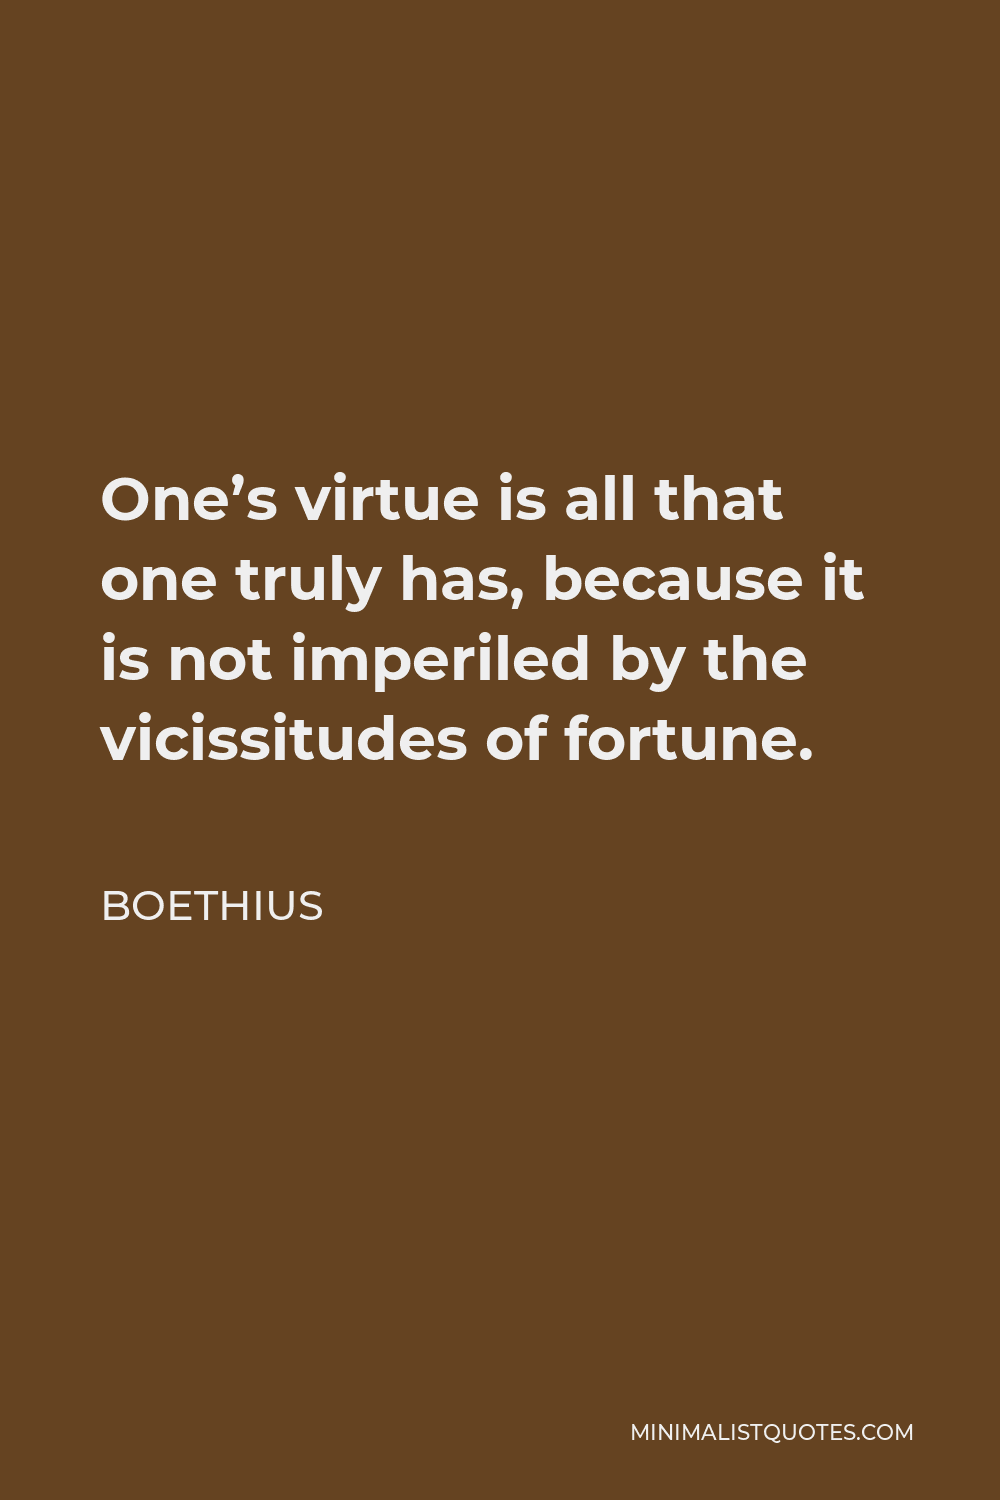 Boethius Quote - One’s virtue is all that one truly has, because it is not imperiled by the vicissitudes of fortune.